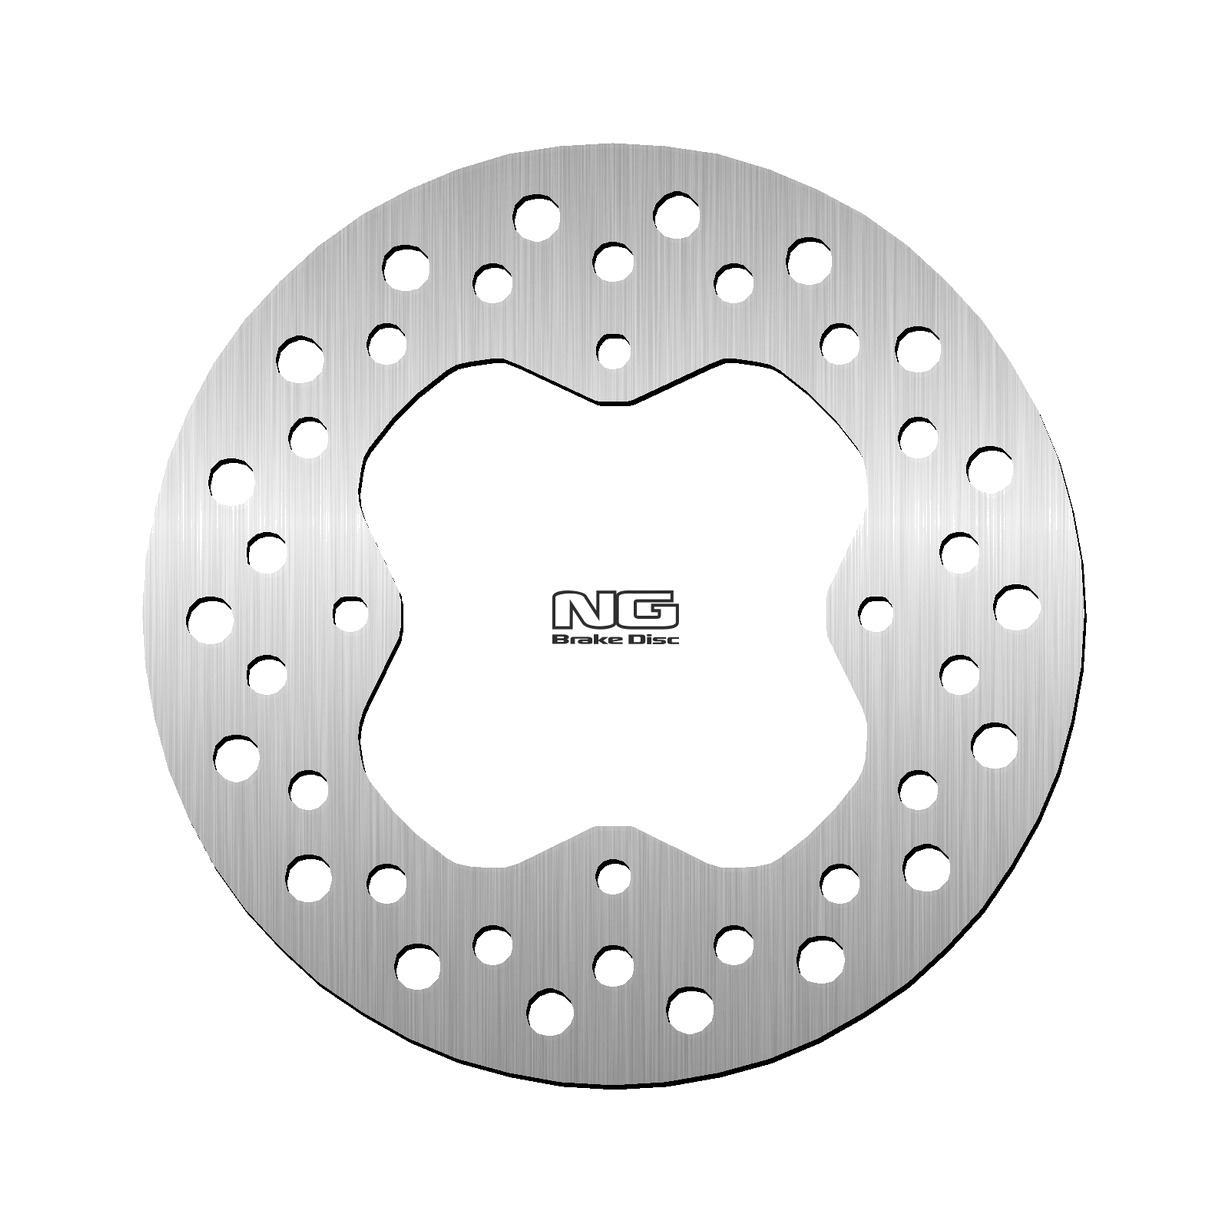 NG BRAKE DISK REMSCHIJF 1483 202X95X4.0 - Picture 1 of 1